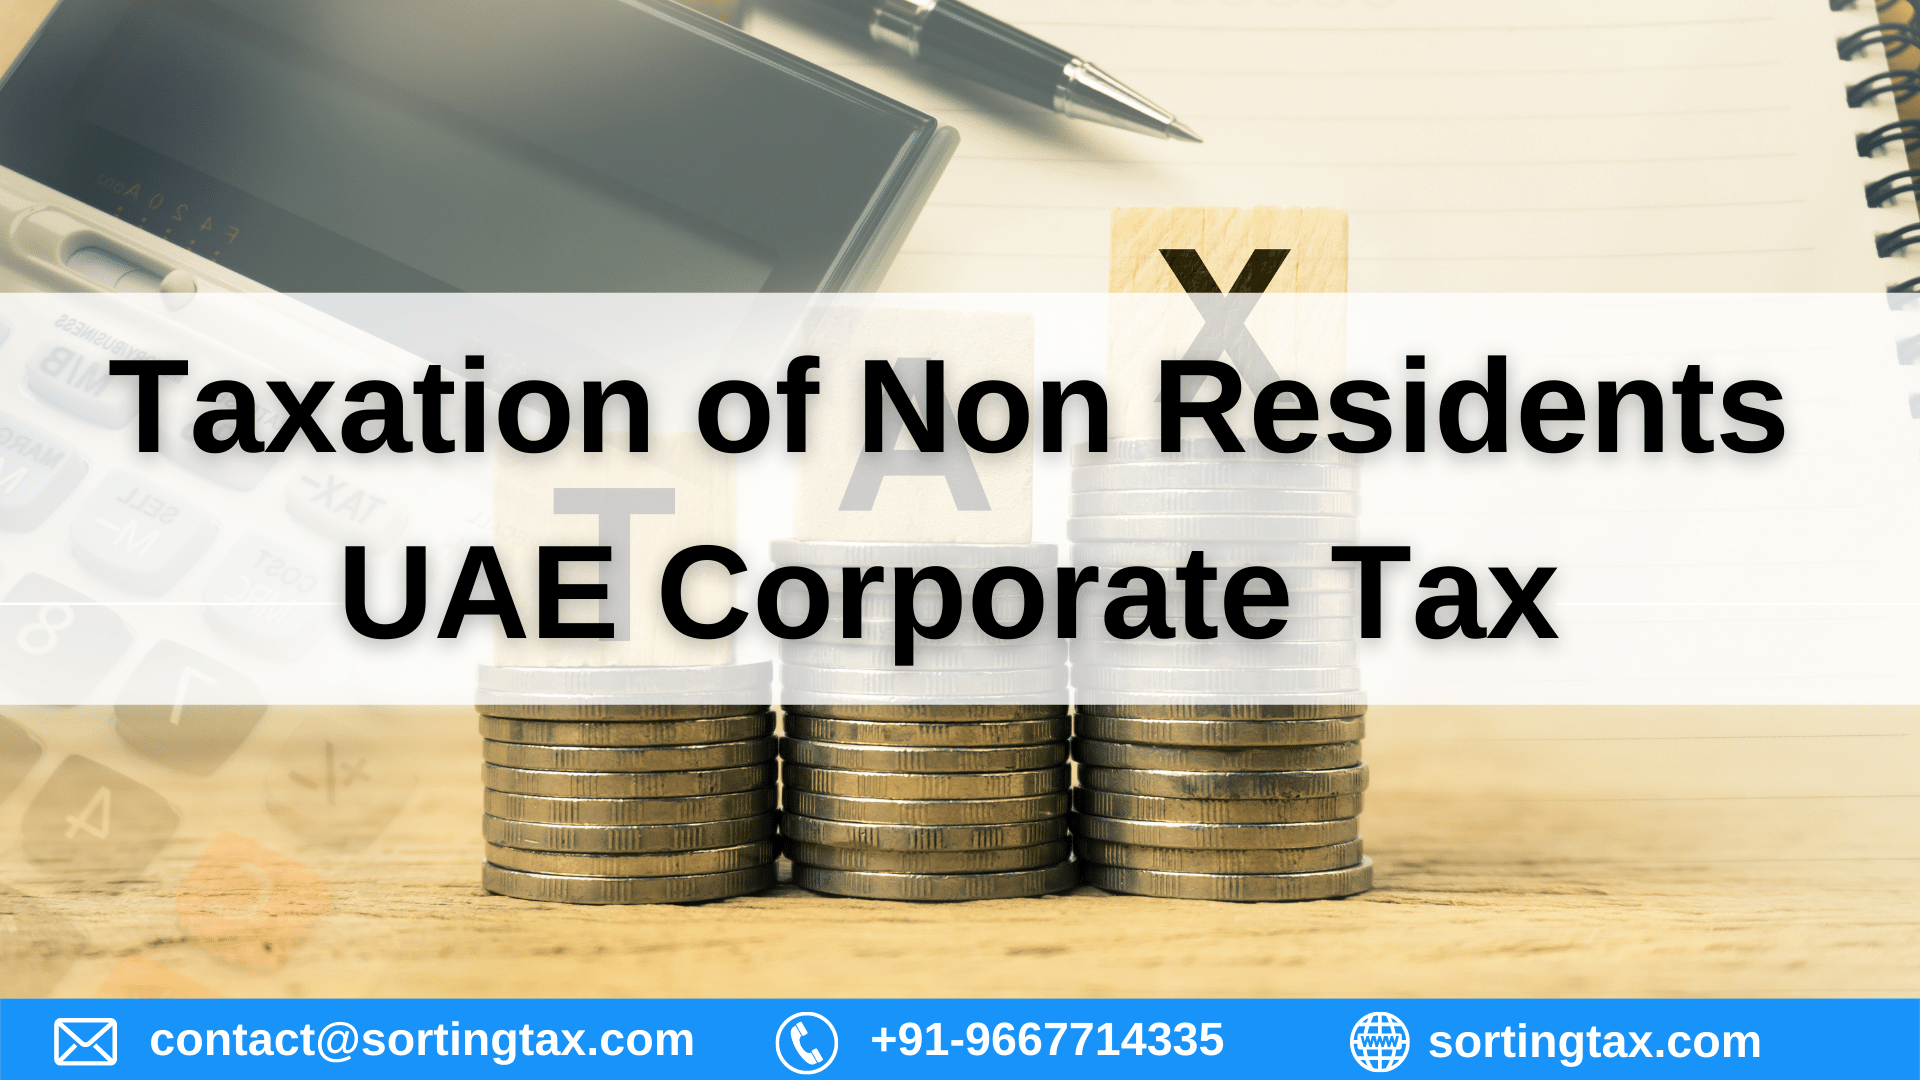 UAE Corporate Tax Taxation of Non Residents